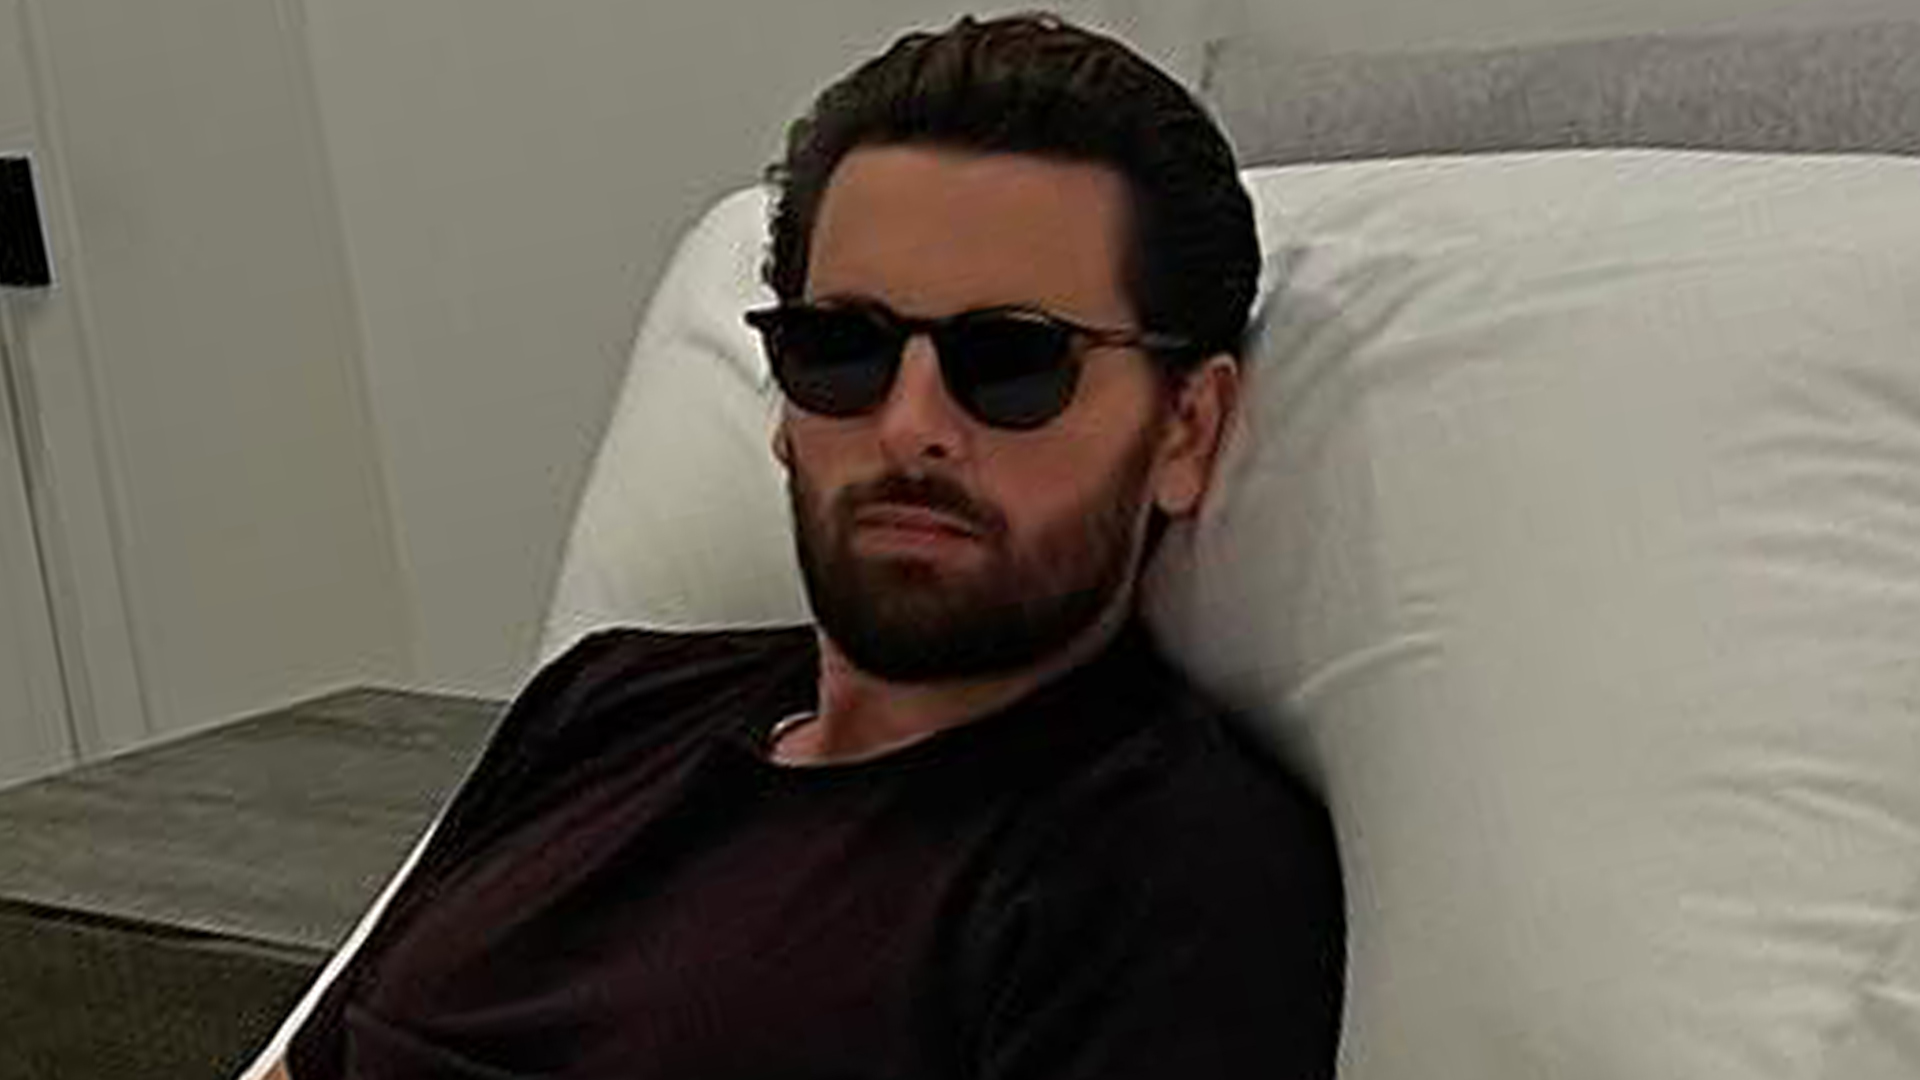 Scott Disick shows off his shrinking frame after major weight loss- but fans are distracted by ‘disgusting’ detail